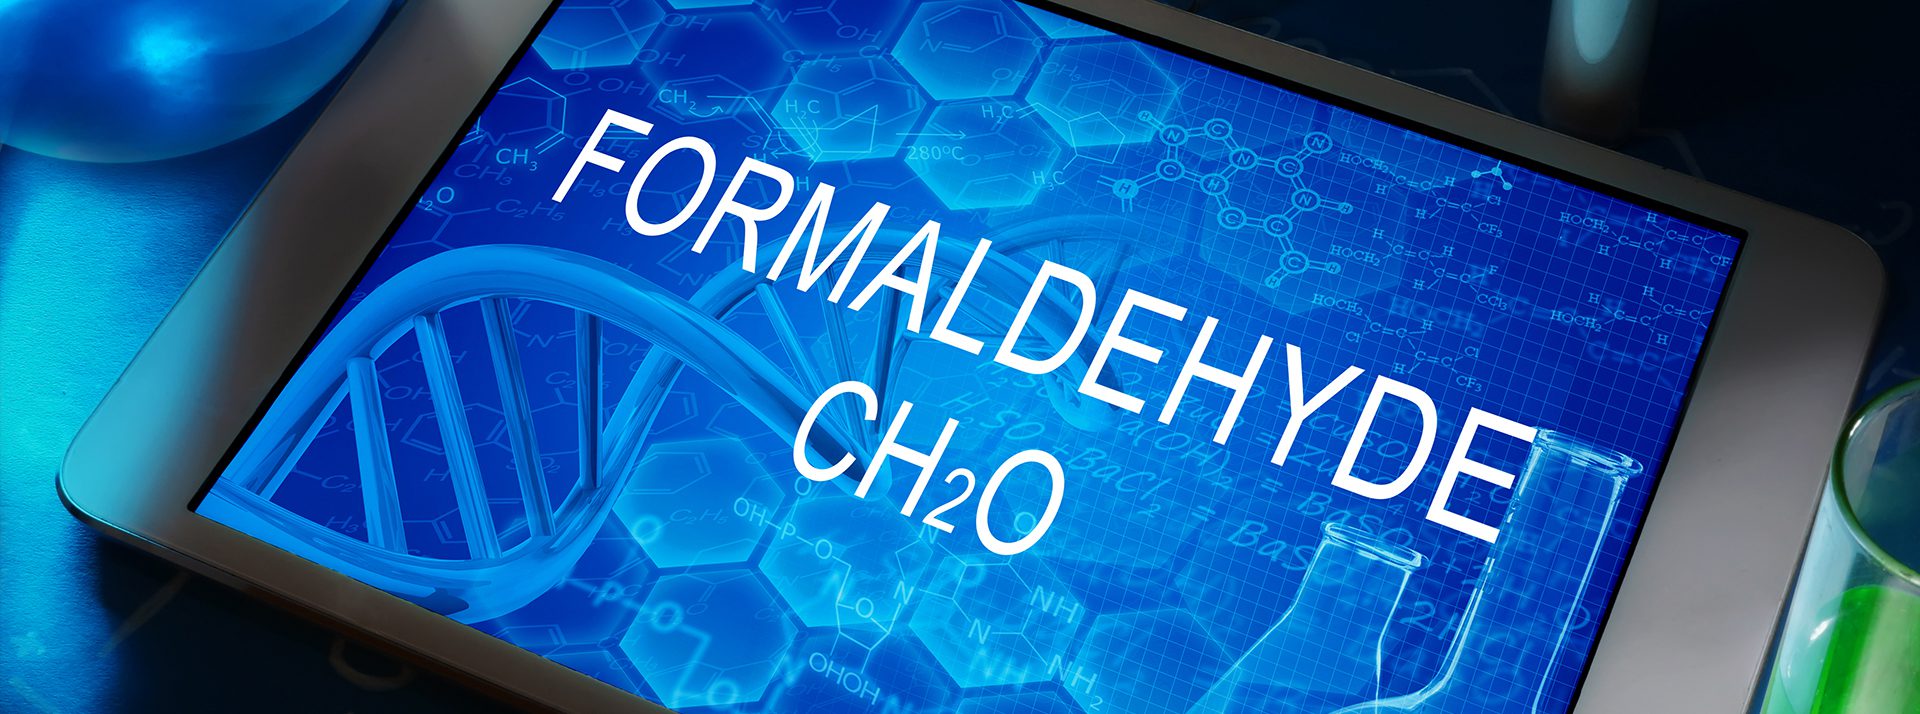 A tablet with the word formaldehyde chlo on it.